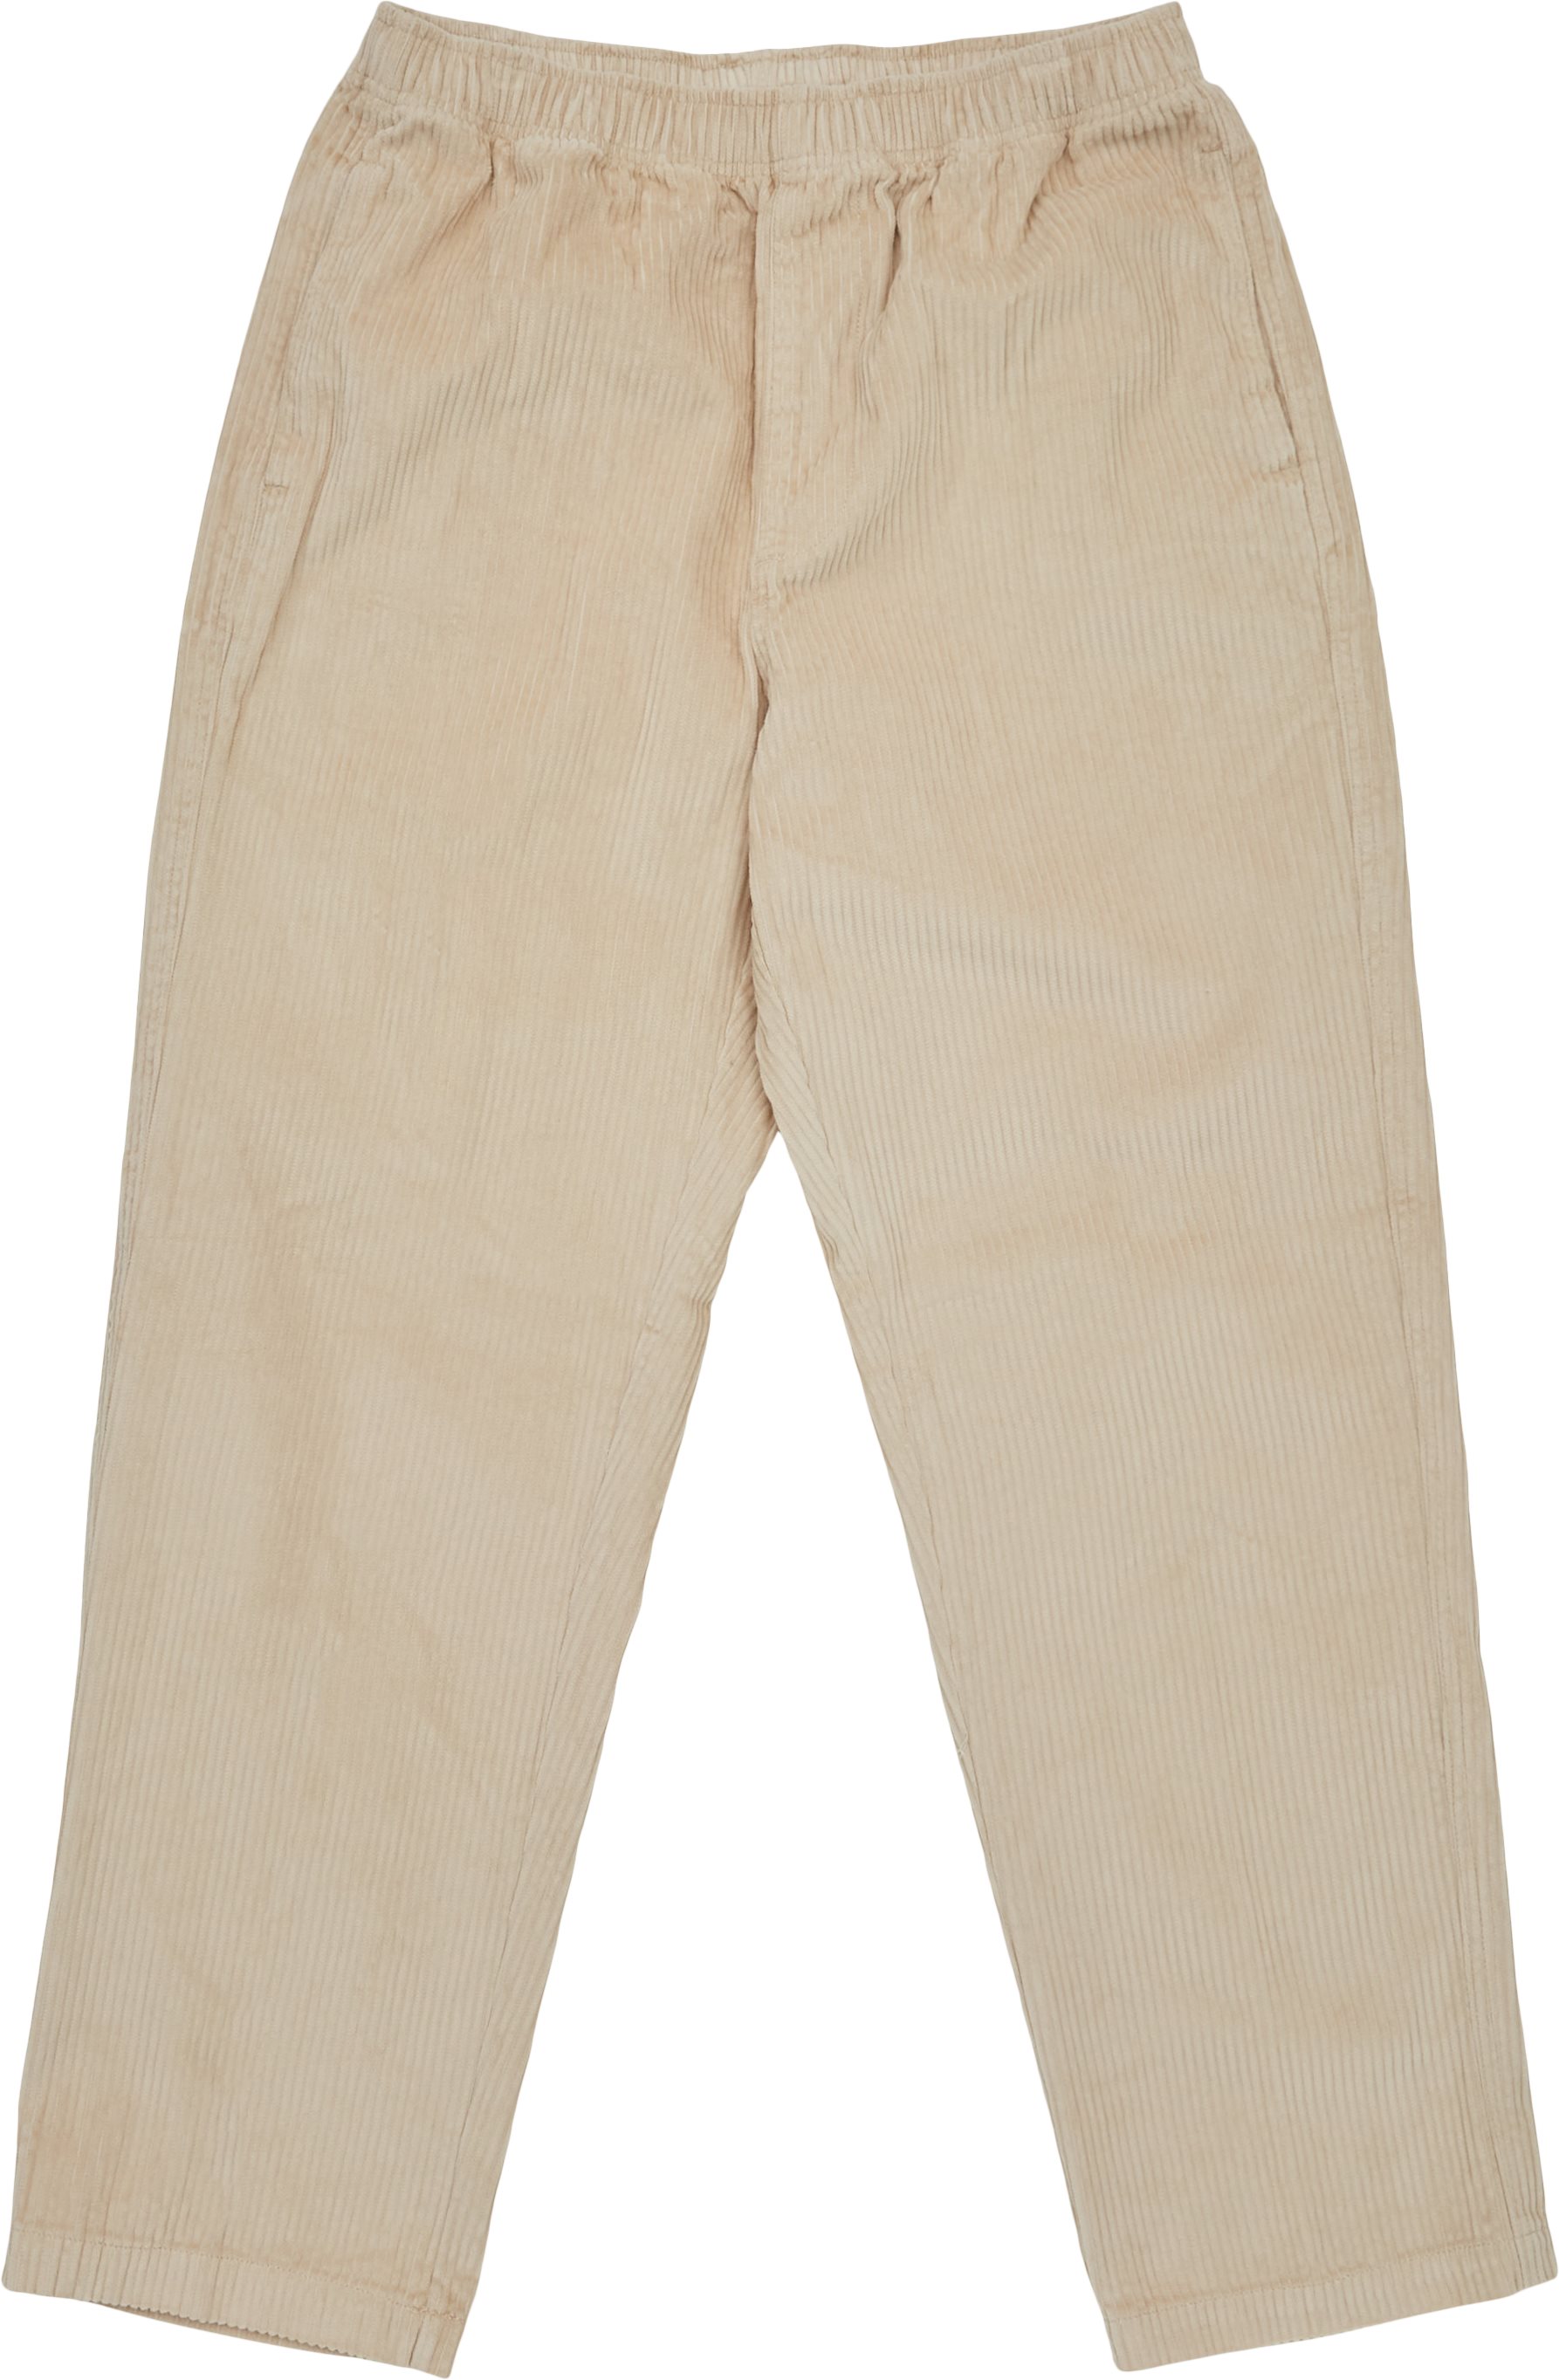 Obey Bukser EASY CORD PANT 142020195 Sand